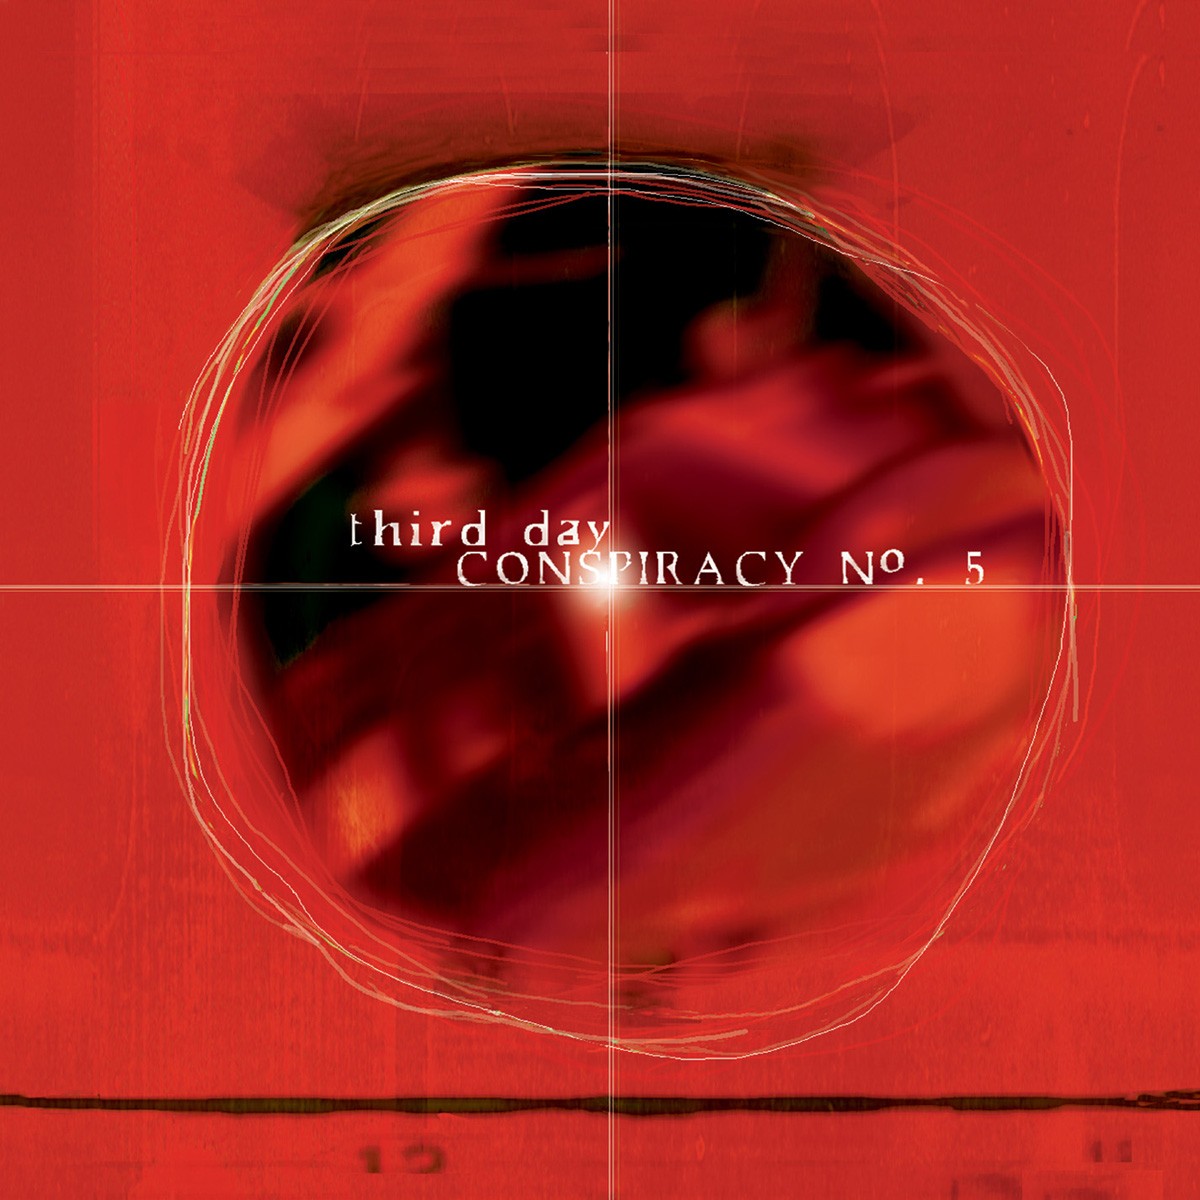 "Conspiracy No. 5" album by Third Day